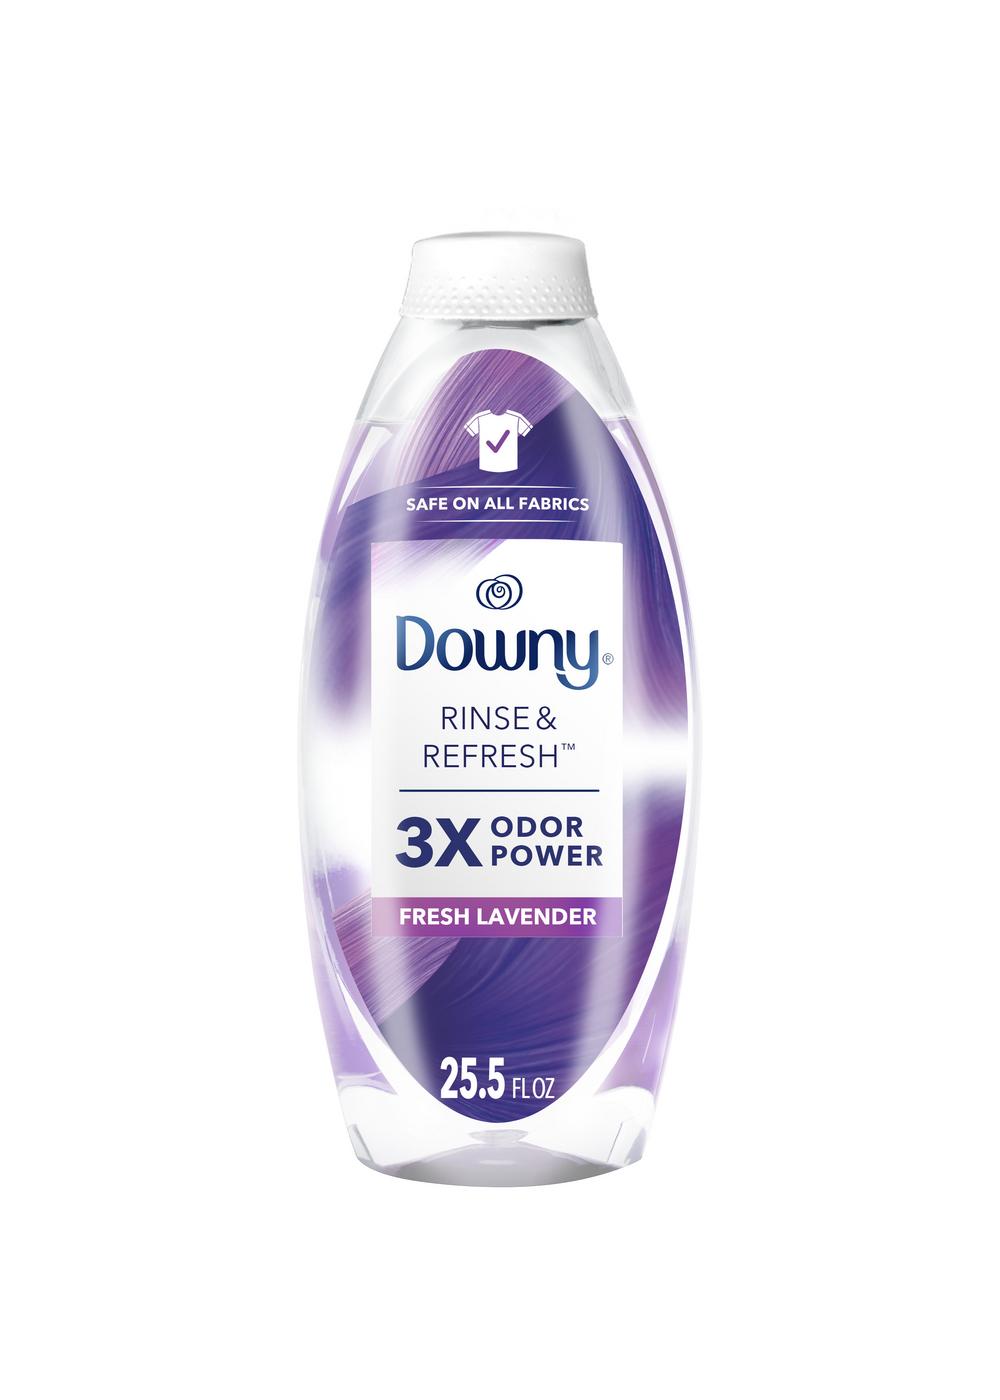 Downy Rinse & Refresh Laundry Odor Remover, 37 Loads - Fresh Lavender; image 1 of 8